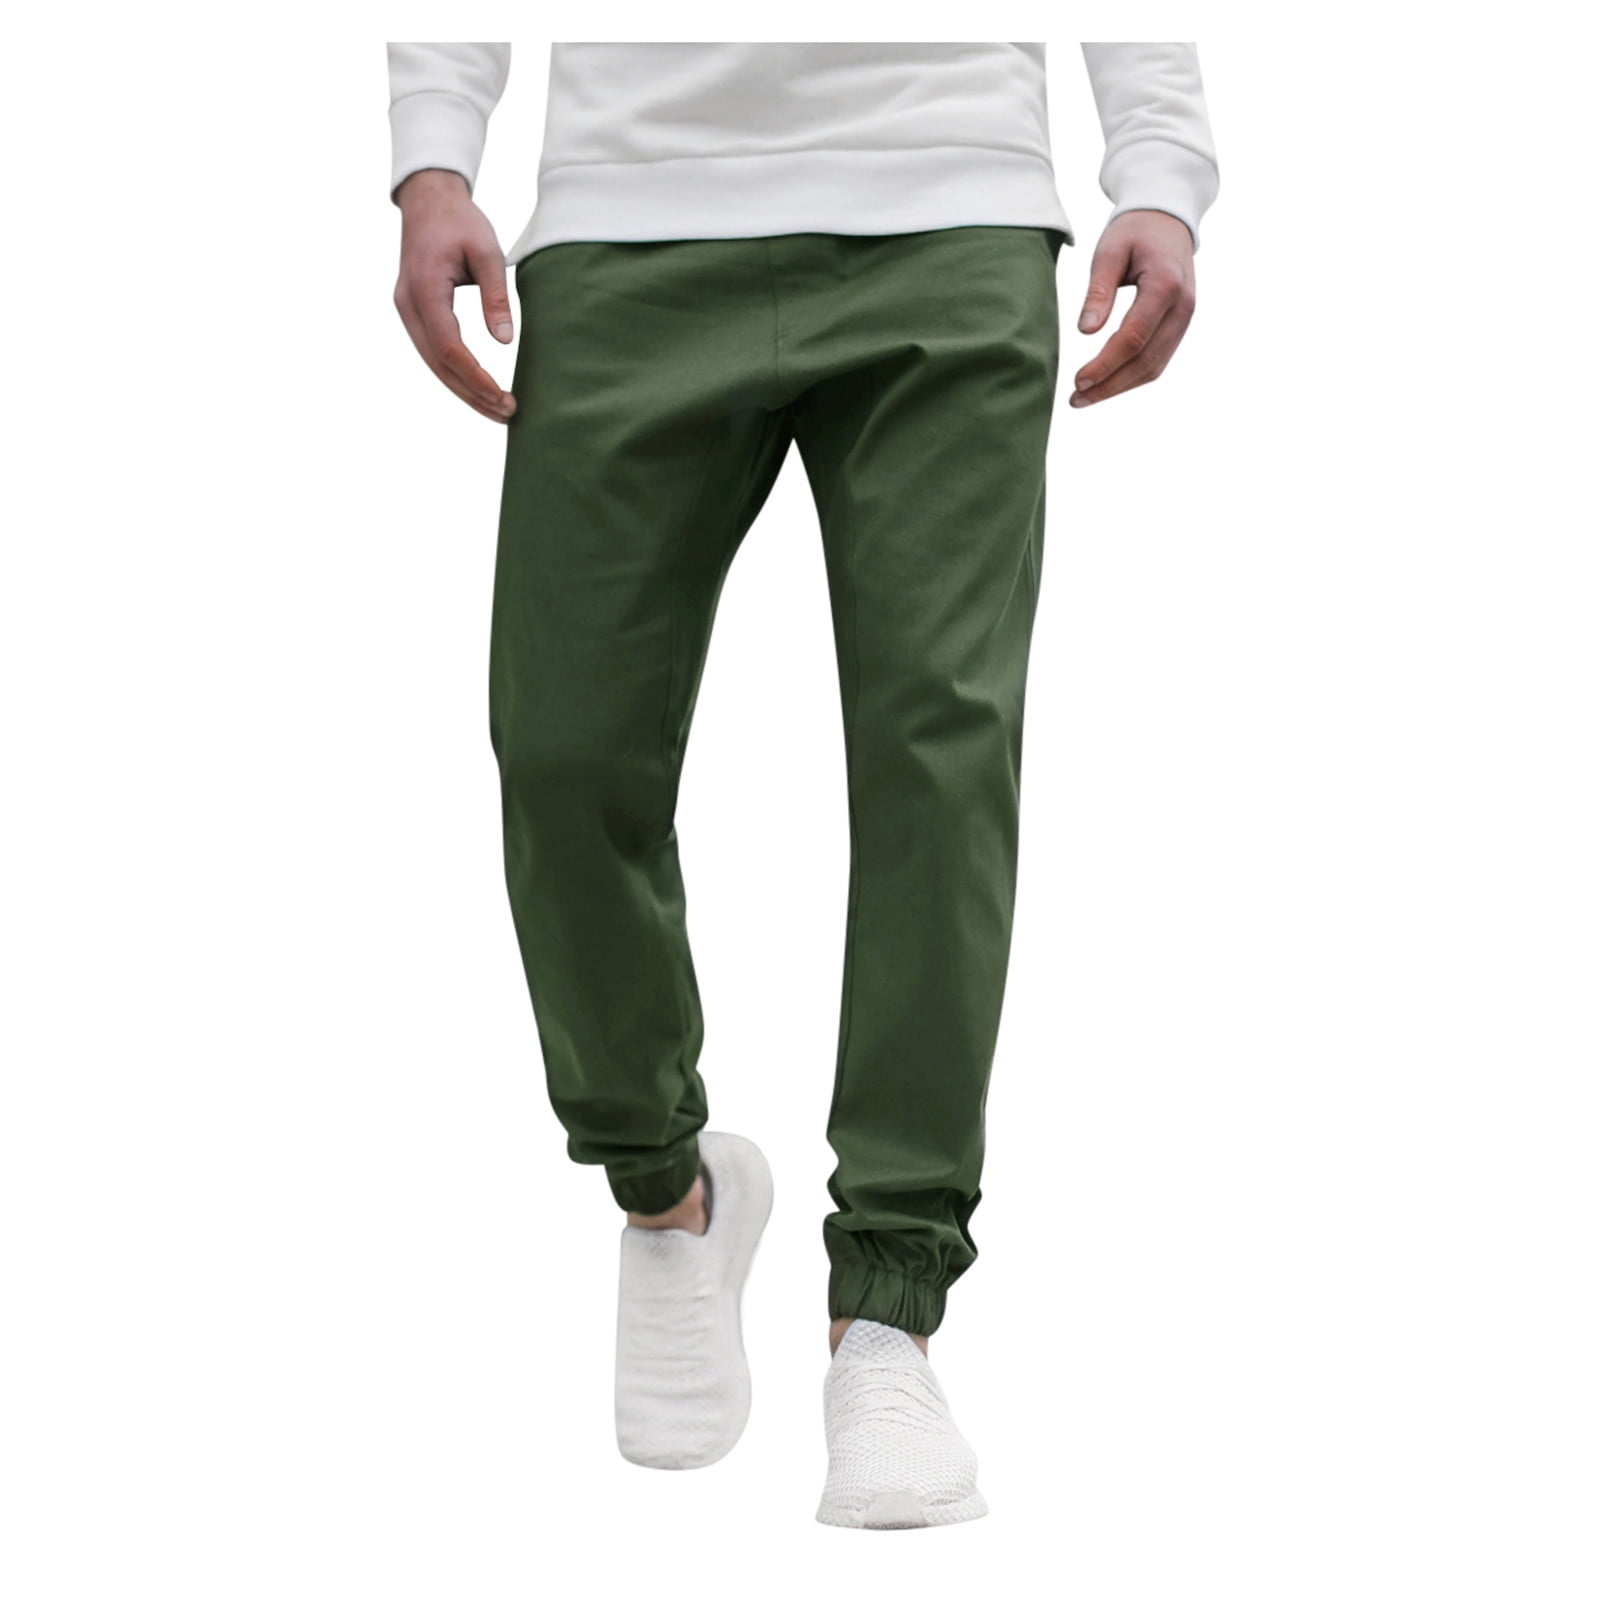 Gubotare Sweatpants For Men Big And Tall Men's Lightweight Joggers  Sweatpants with Zipper Pockets Gym Workout Pants for Running Track Casual  Golf,Green XL 